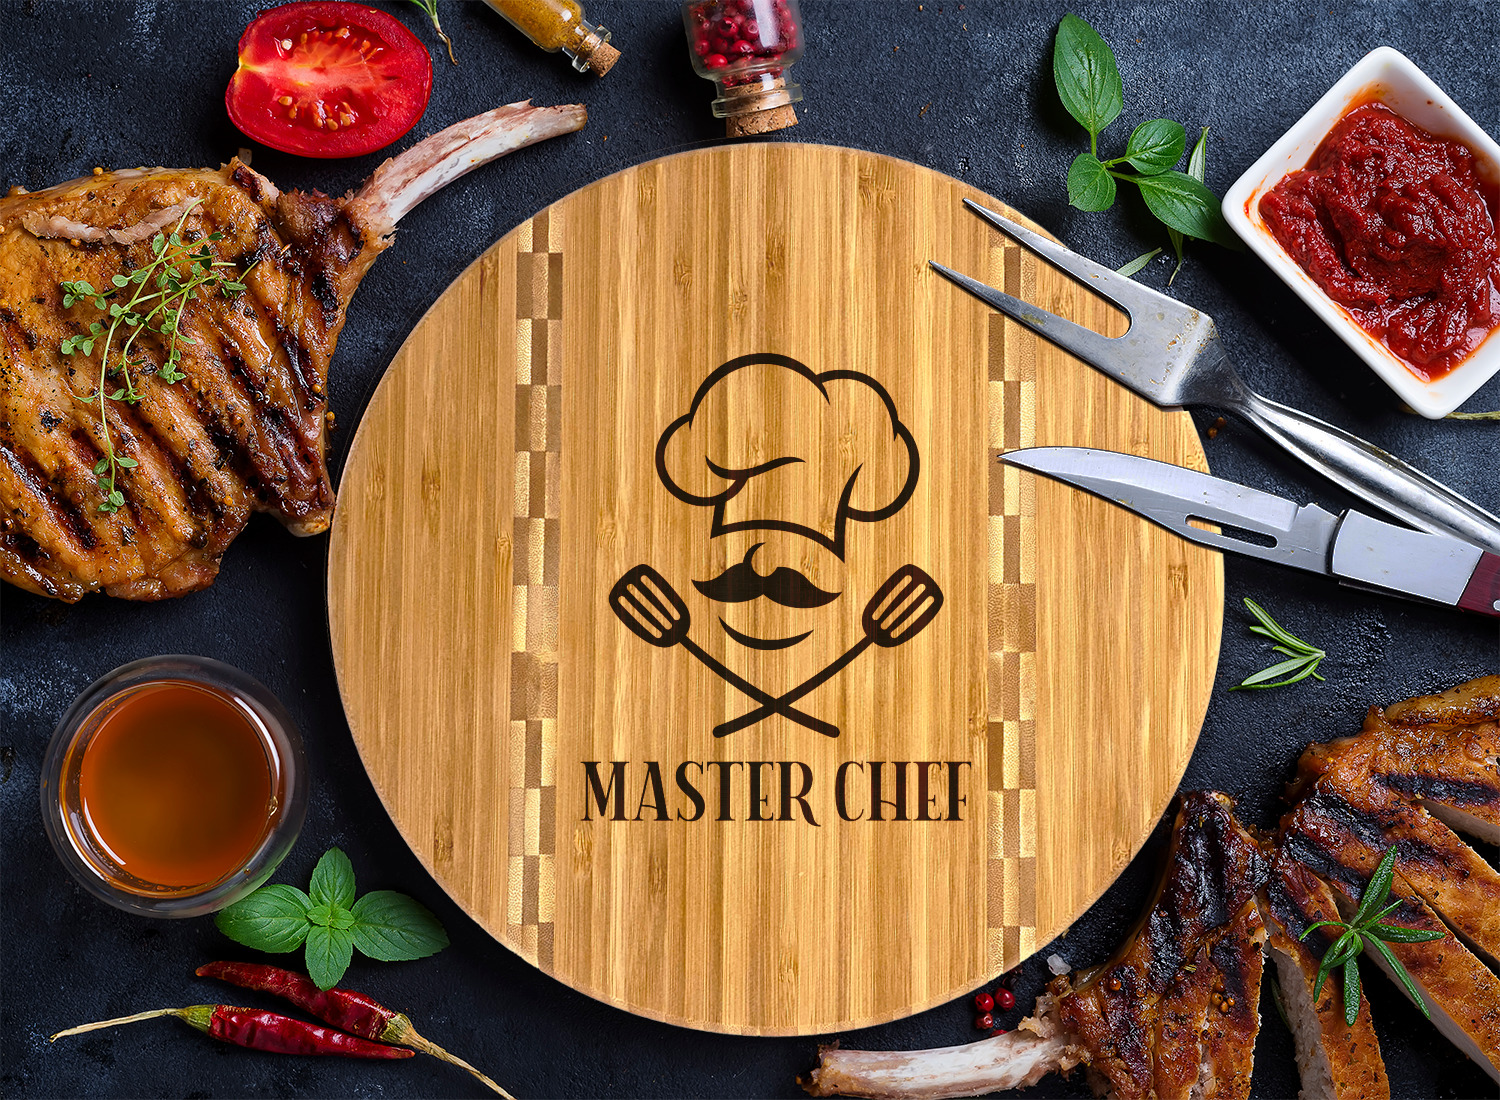 Personalized Chefs Bamboo Cutting Board